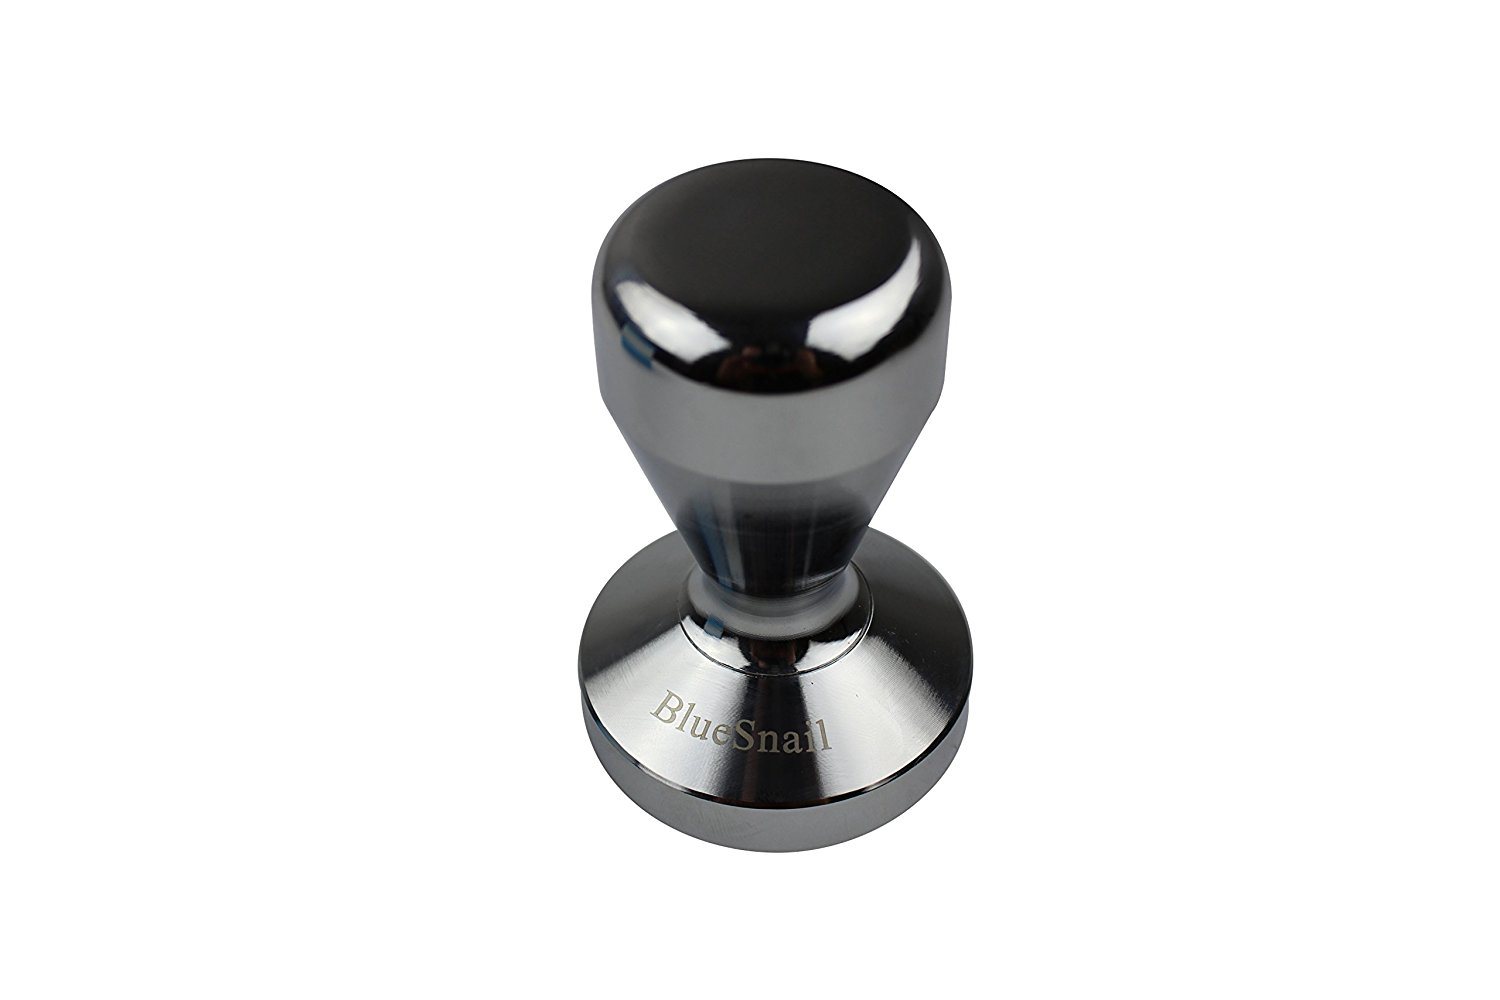 BlueSnail Coffee Tamper Review